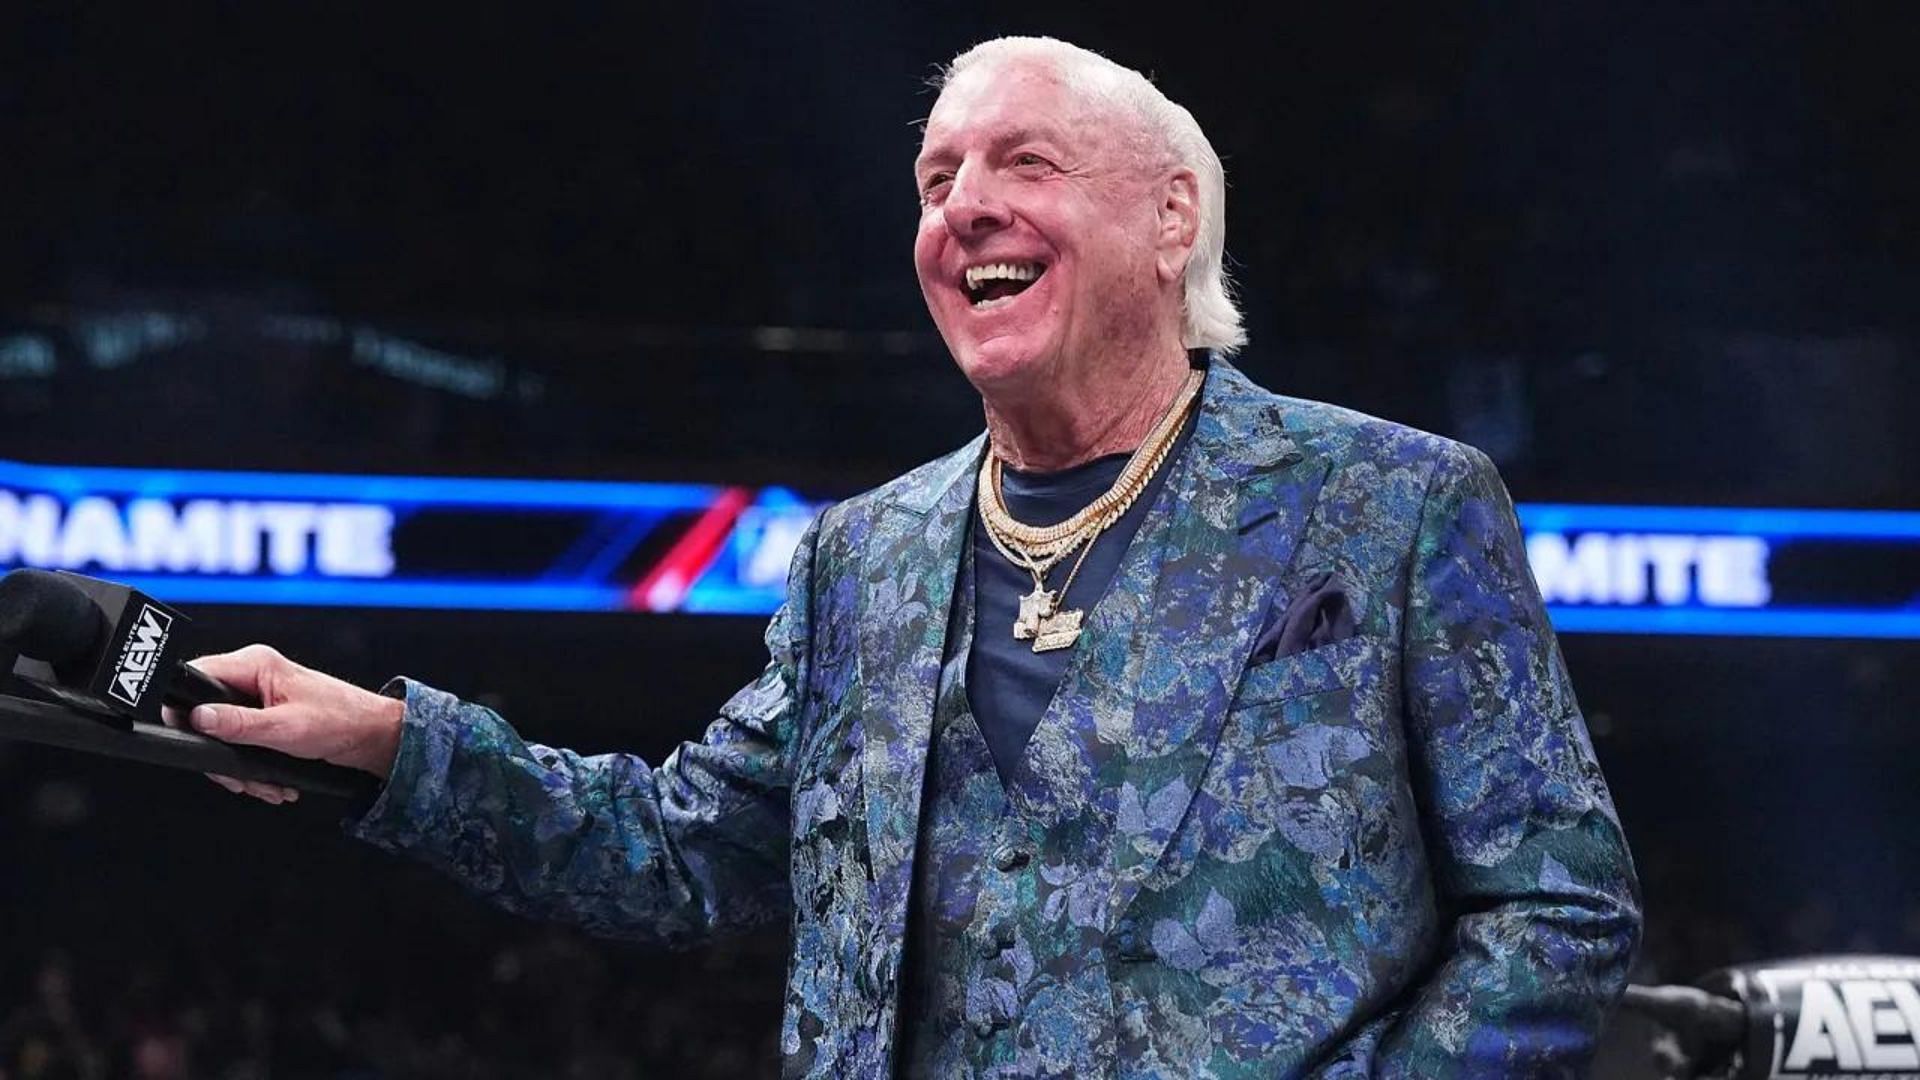 Ric Flair is a 16-time world champion and WWE Hall of Famer